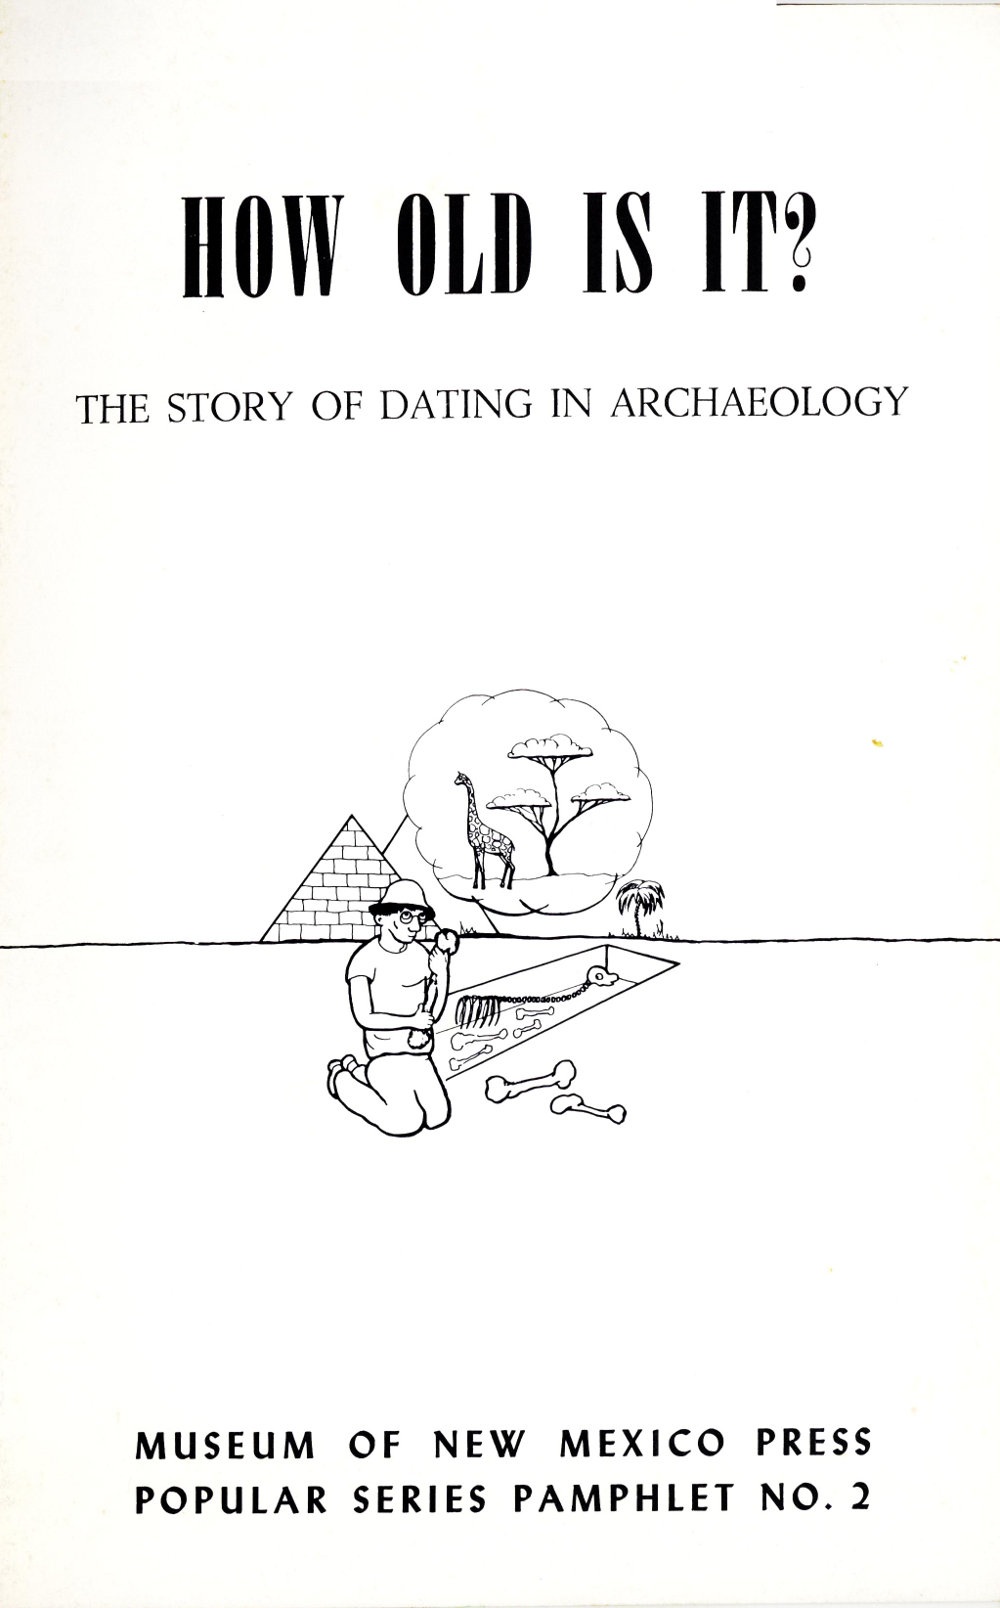 How Old Is It? The Story of Dating in Archaeology